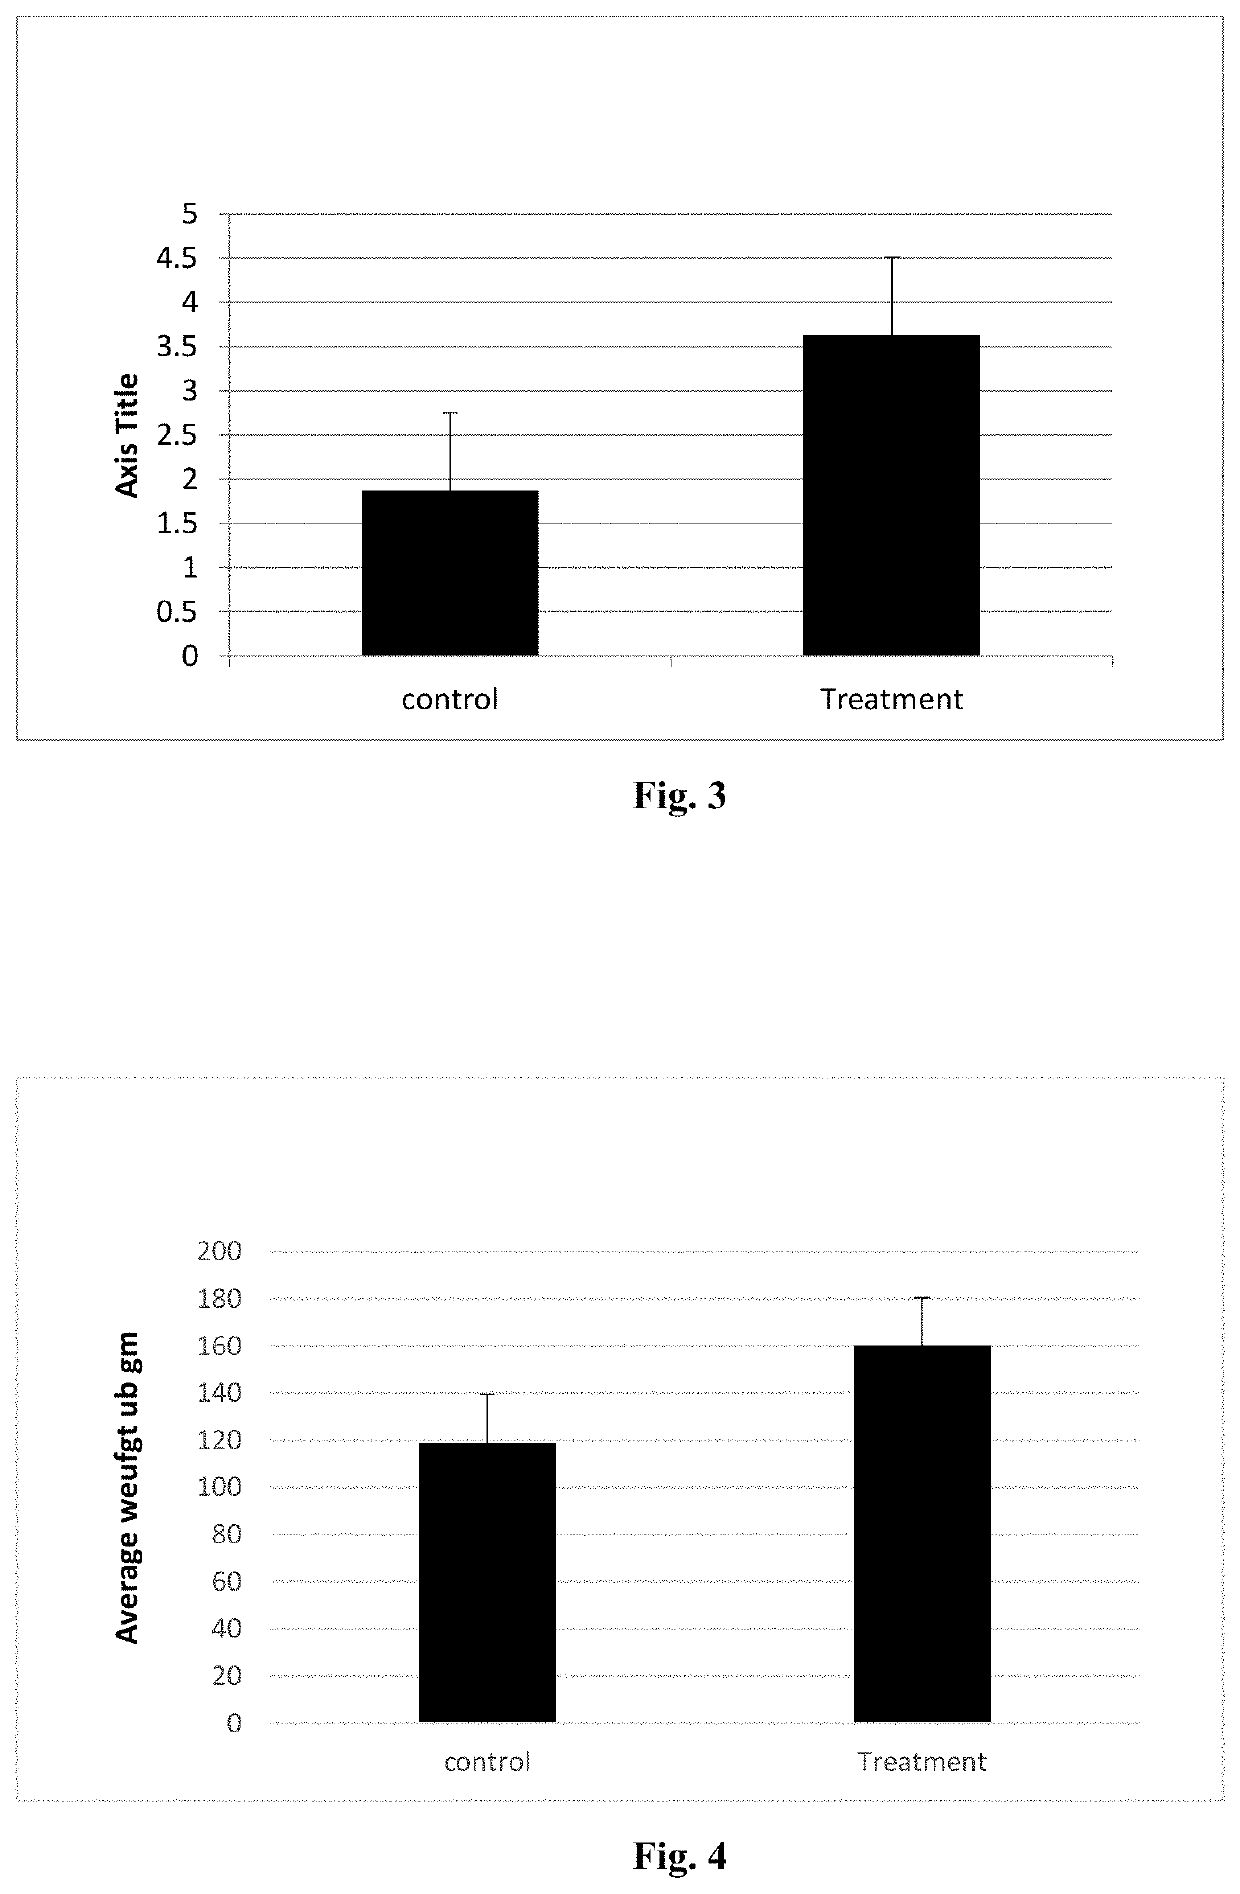 Non-gm improved tomato crops and methods for obtaining crops with improved inheritable traits